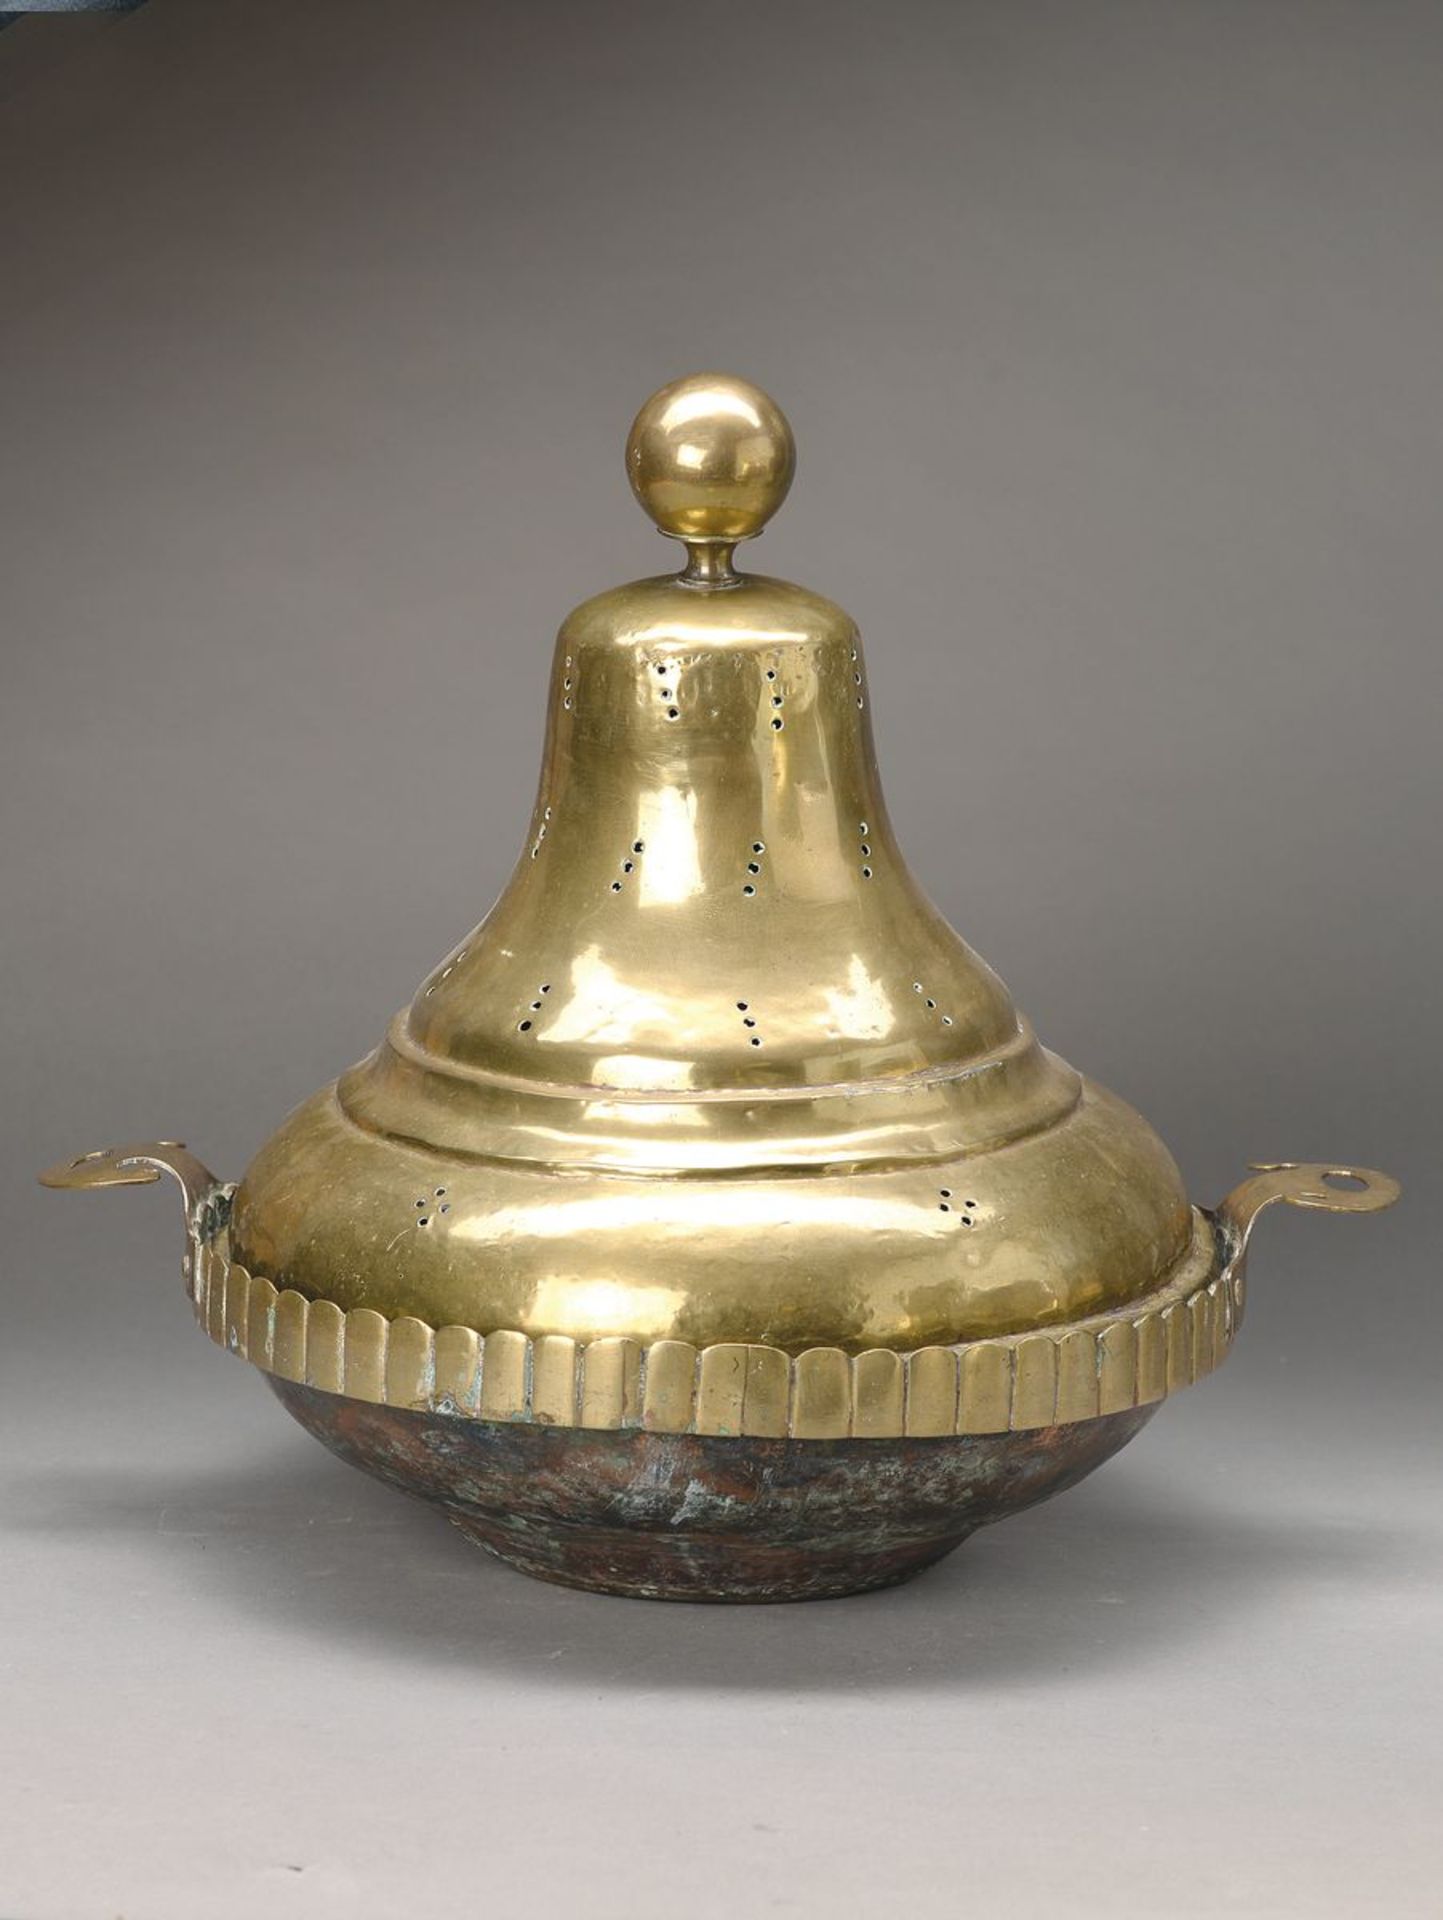 keep warm vessel, Ottoman, 19th c., brass, cover with small holes, H. 41 cm, D. 42 cm